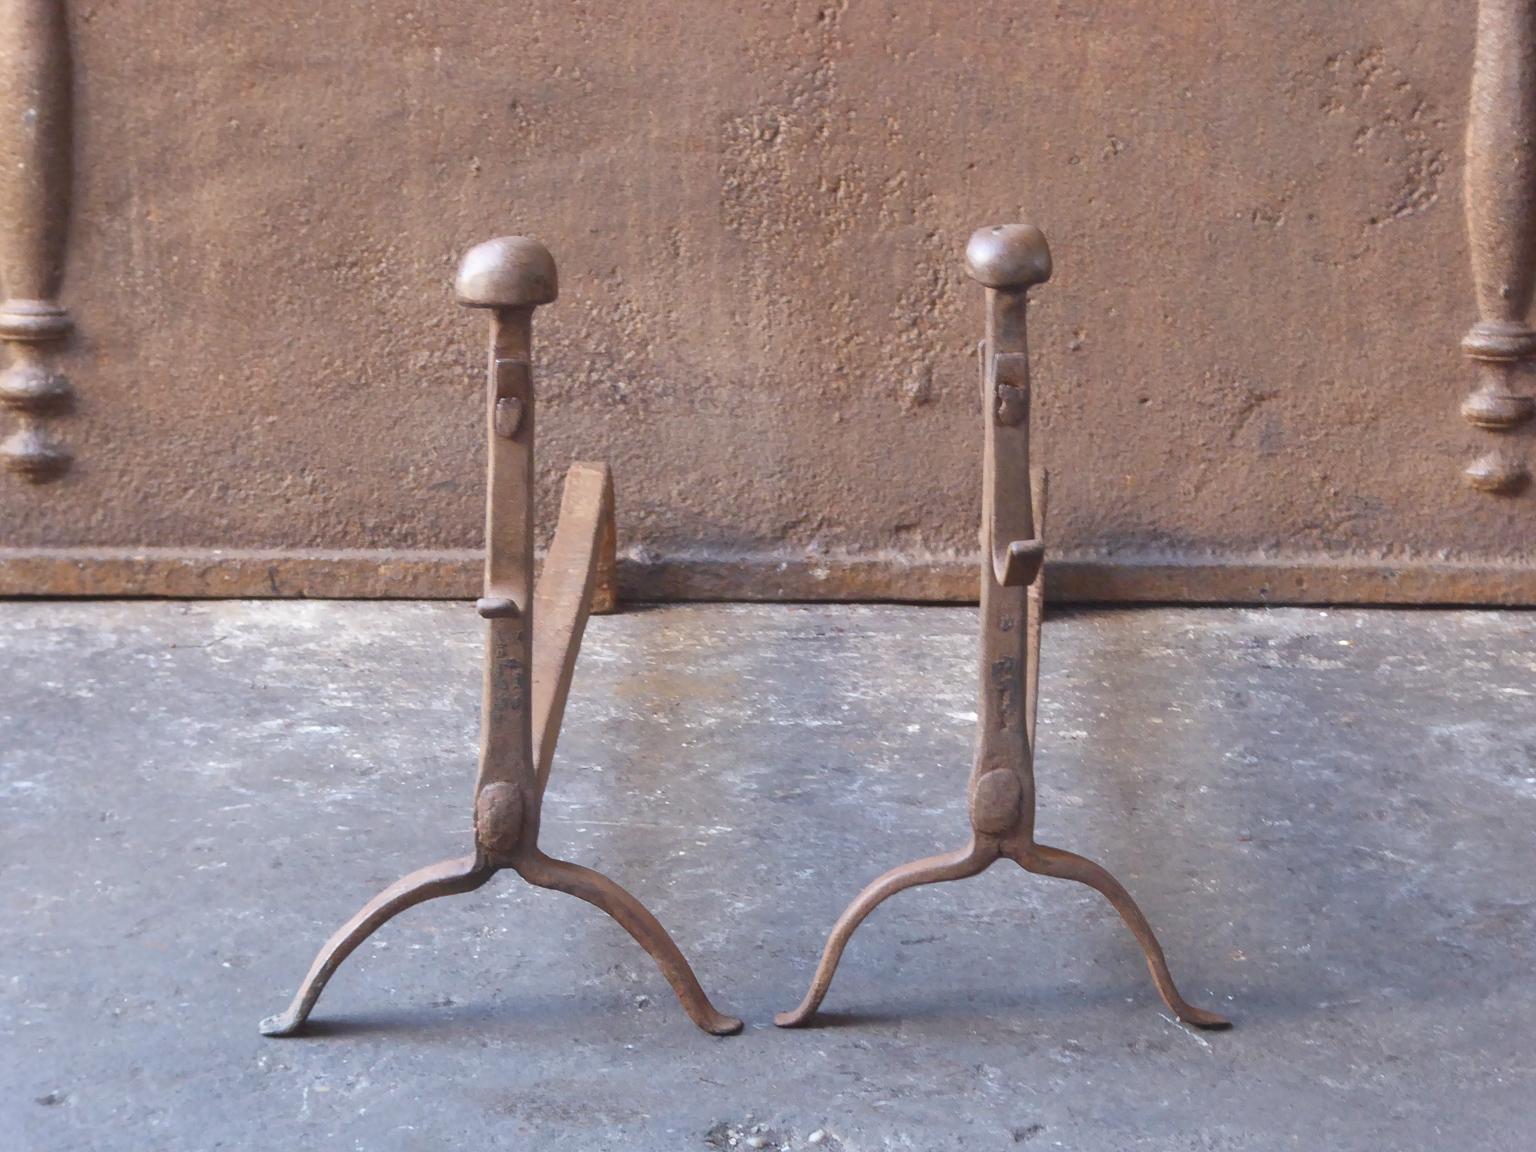 17th-18th century French andirons made of wrought iron. The style of the andirons is gothic. The andirons have spit hooks to grill food. They have a natural brown patina. Upon request it can be made black. The condition is good.